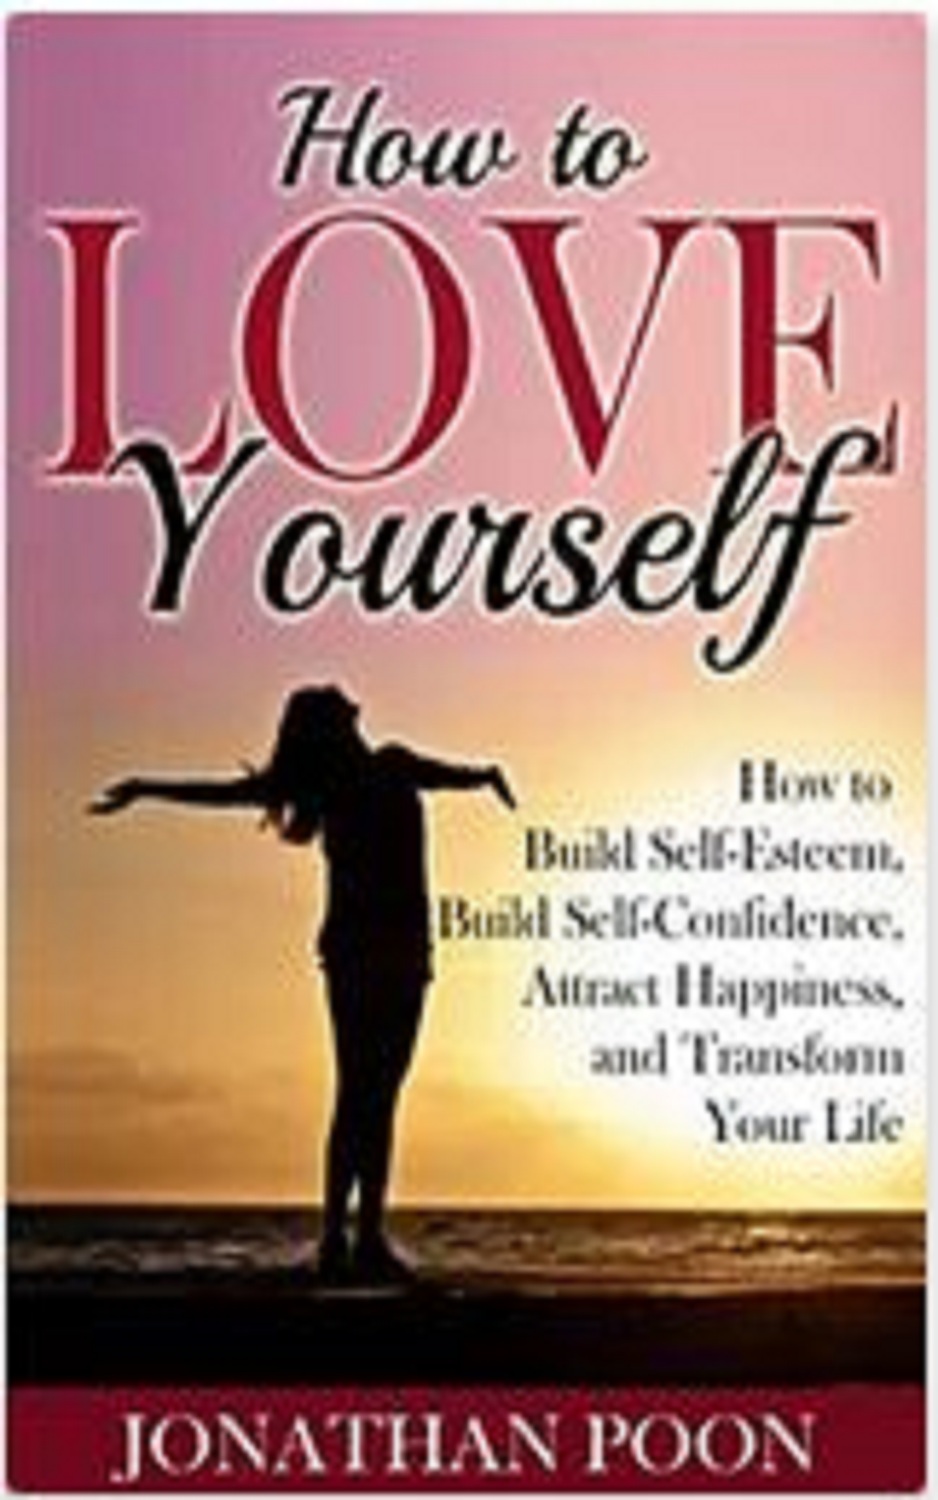 FREE: How to Love Yourself by Jonathan Poon